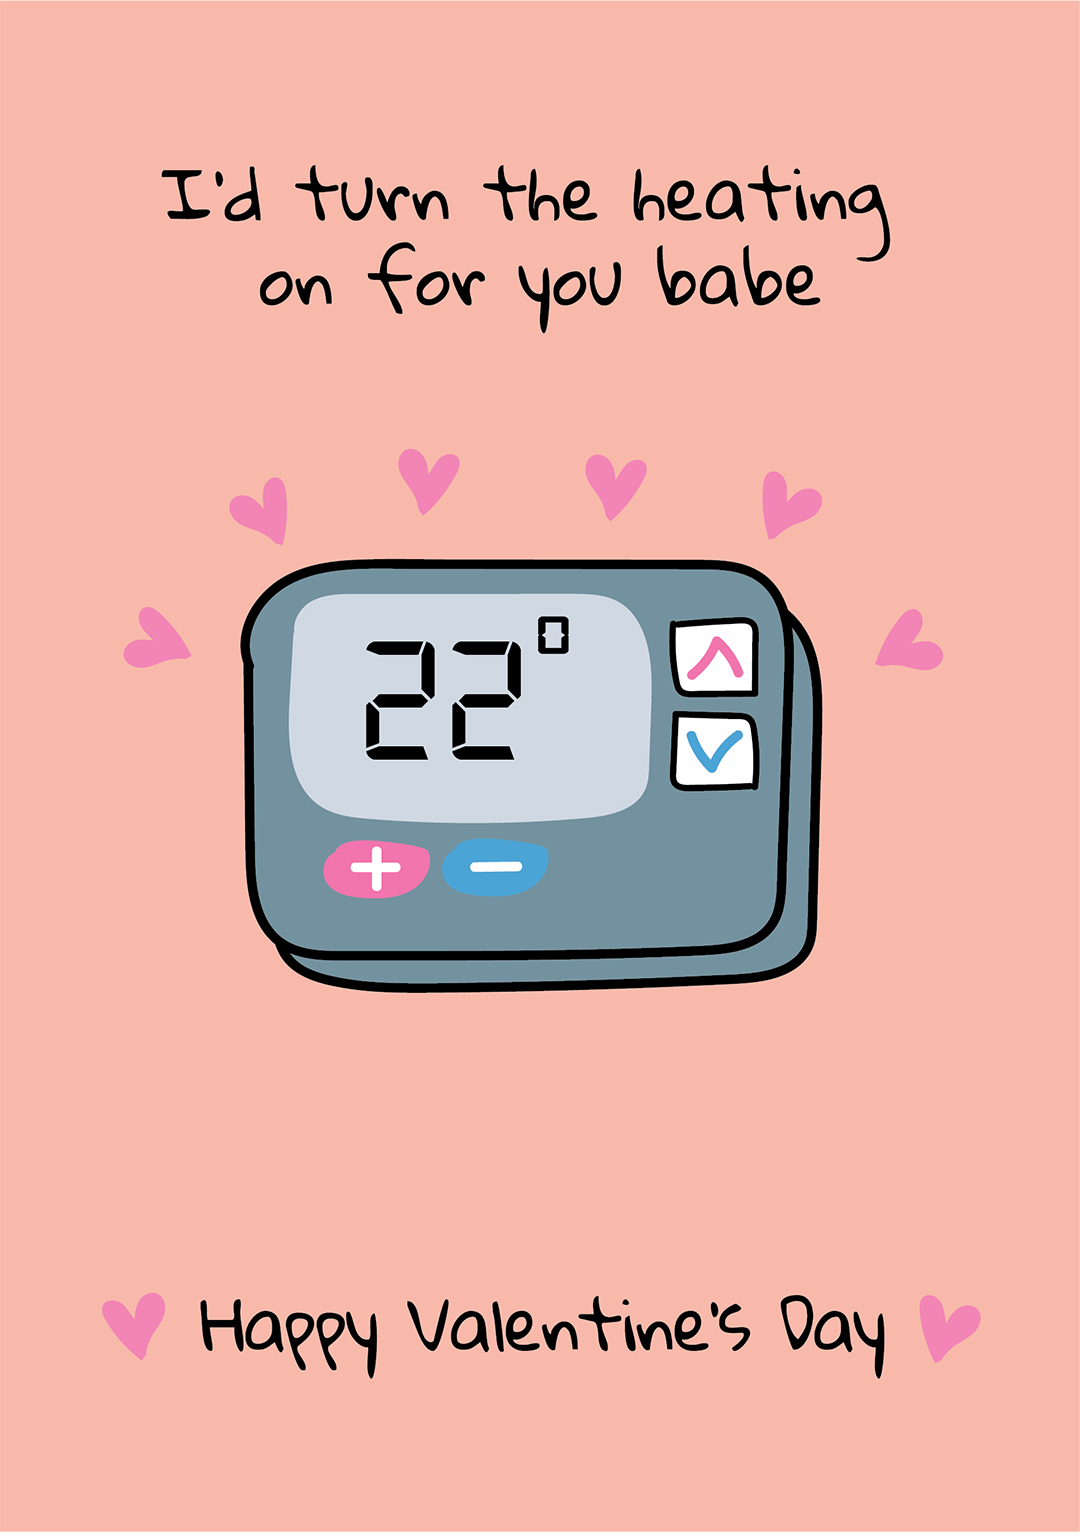 I'd Turn The Heating On For You - Valentine's Day Card